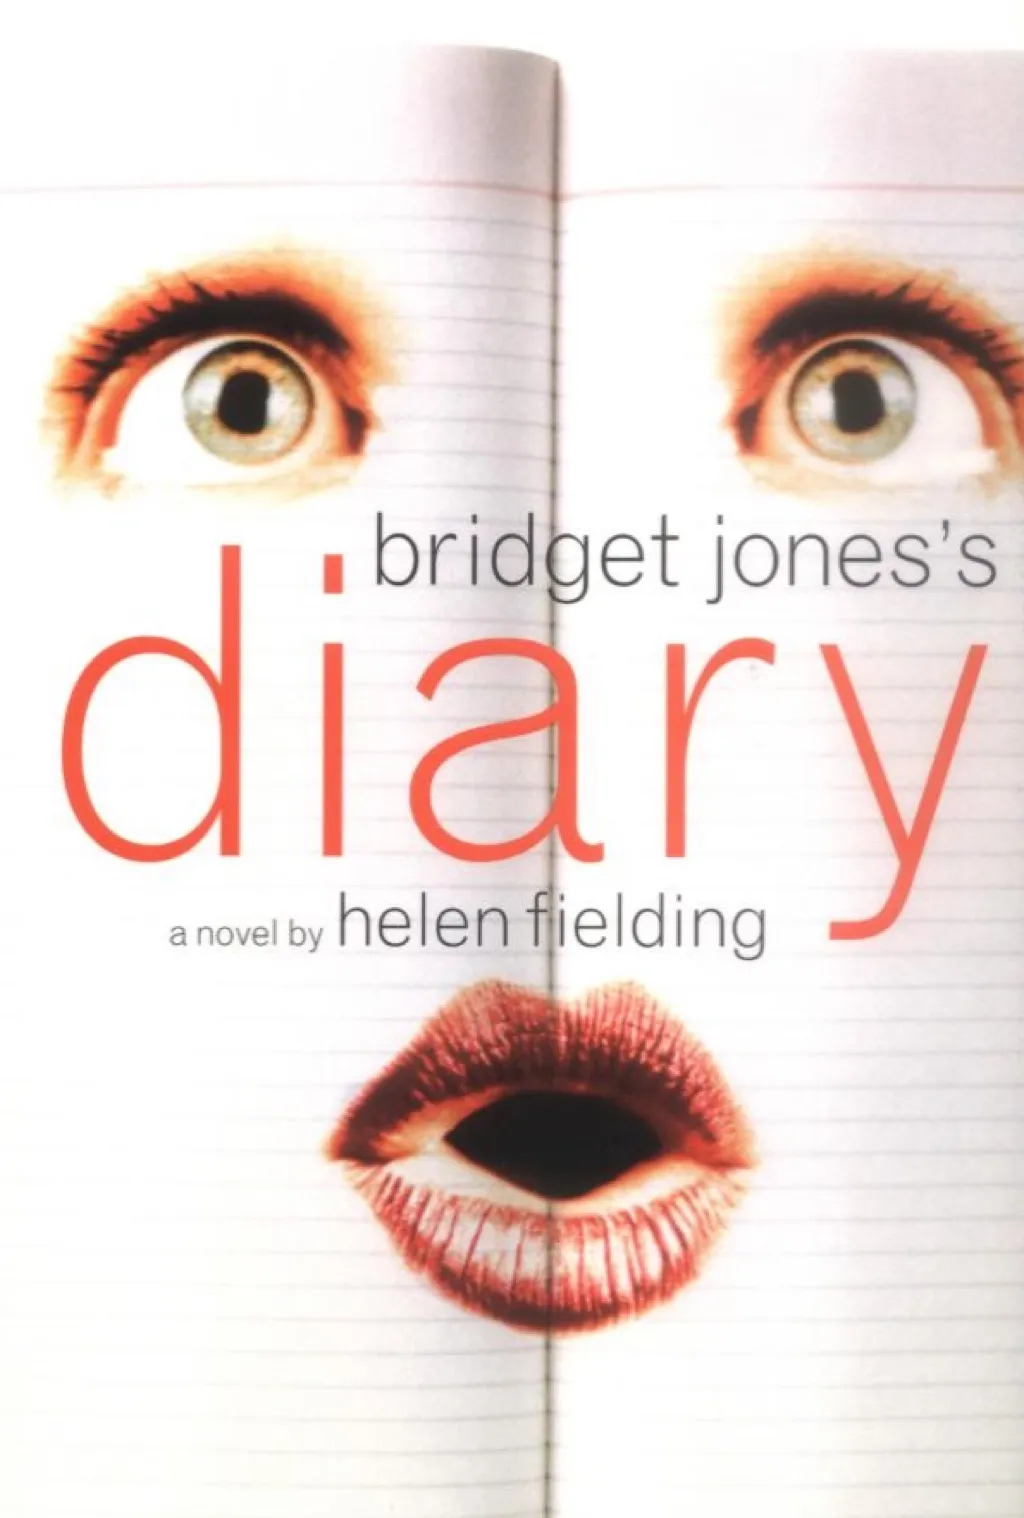 Diary of Bridget Jones, books every woman should read in her 40s